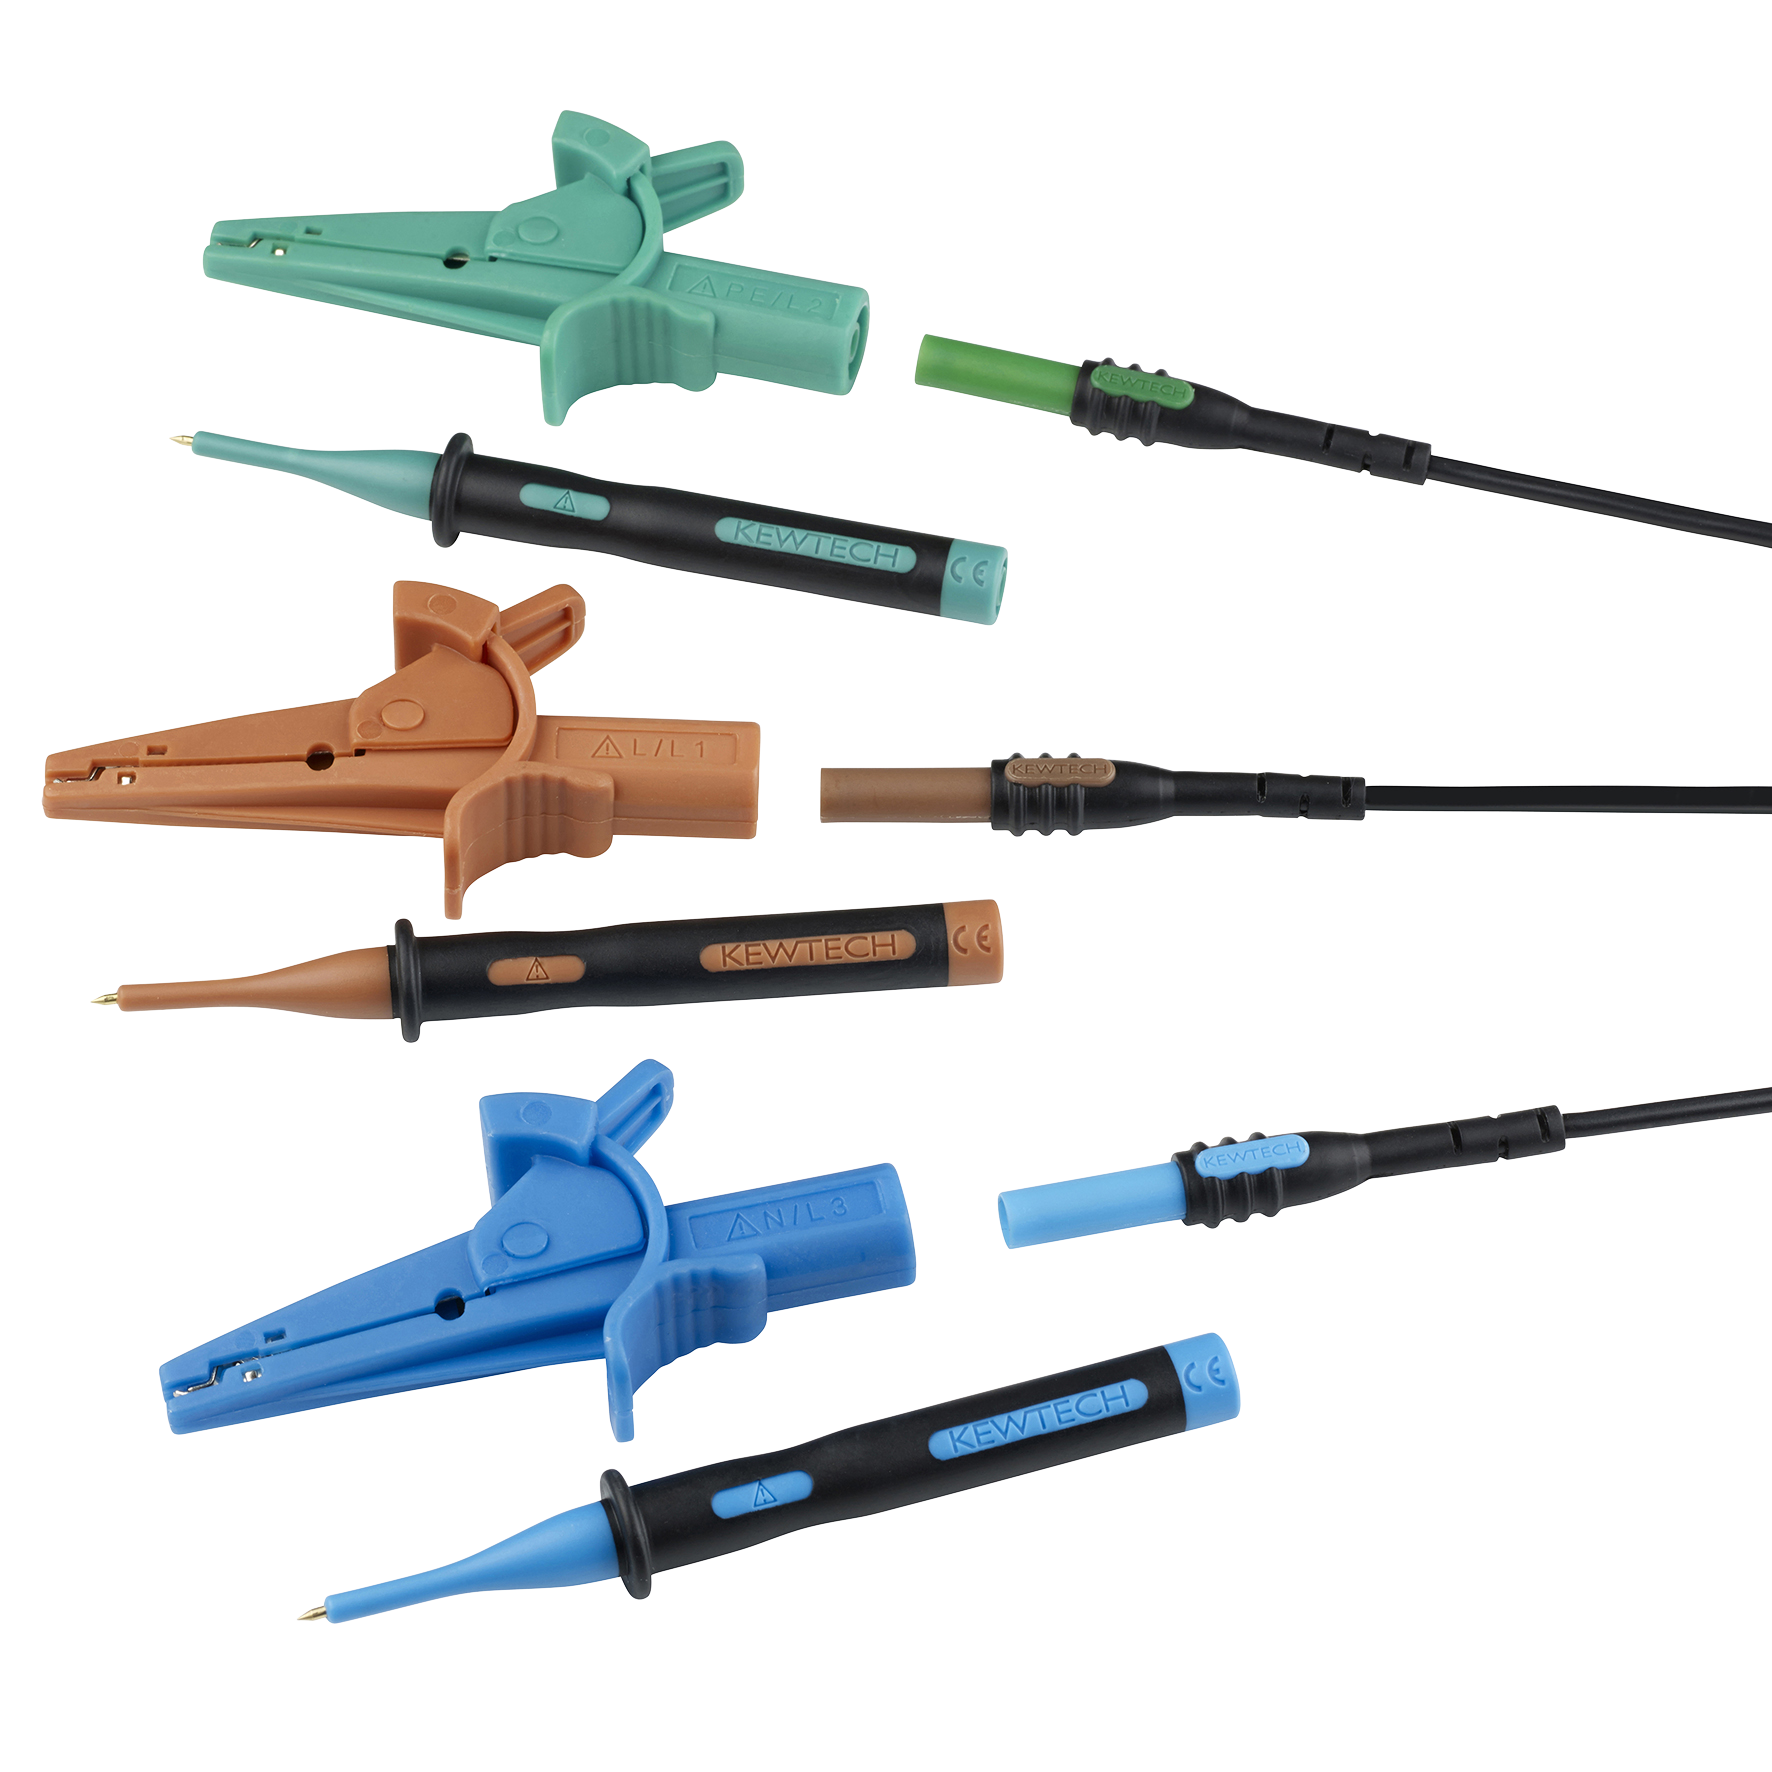 3 Wire Electrical Unfused Test Leads Probes and Croc Clips Fluke Megger Kewtech 